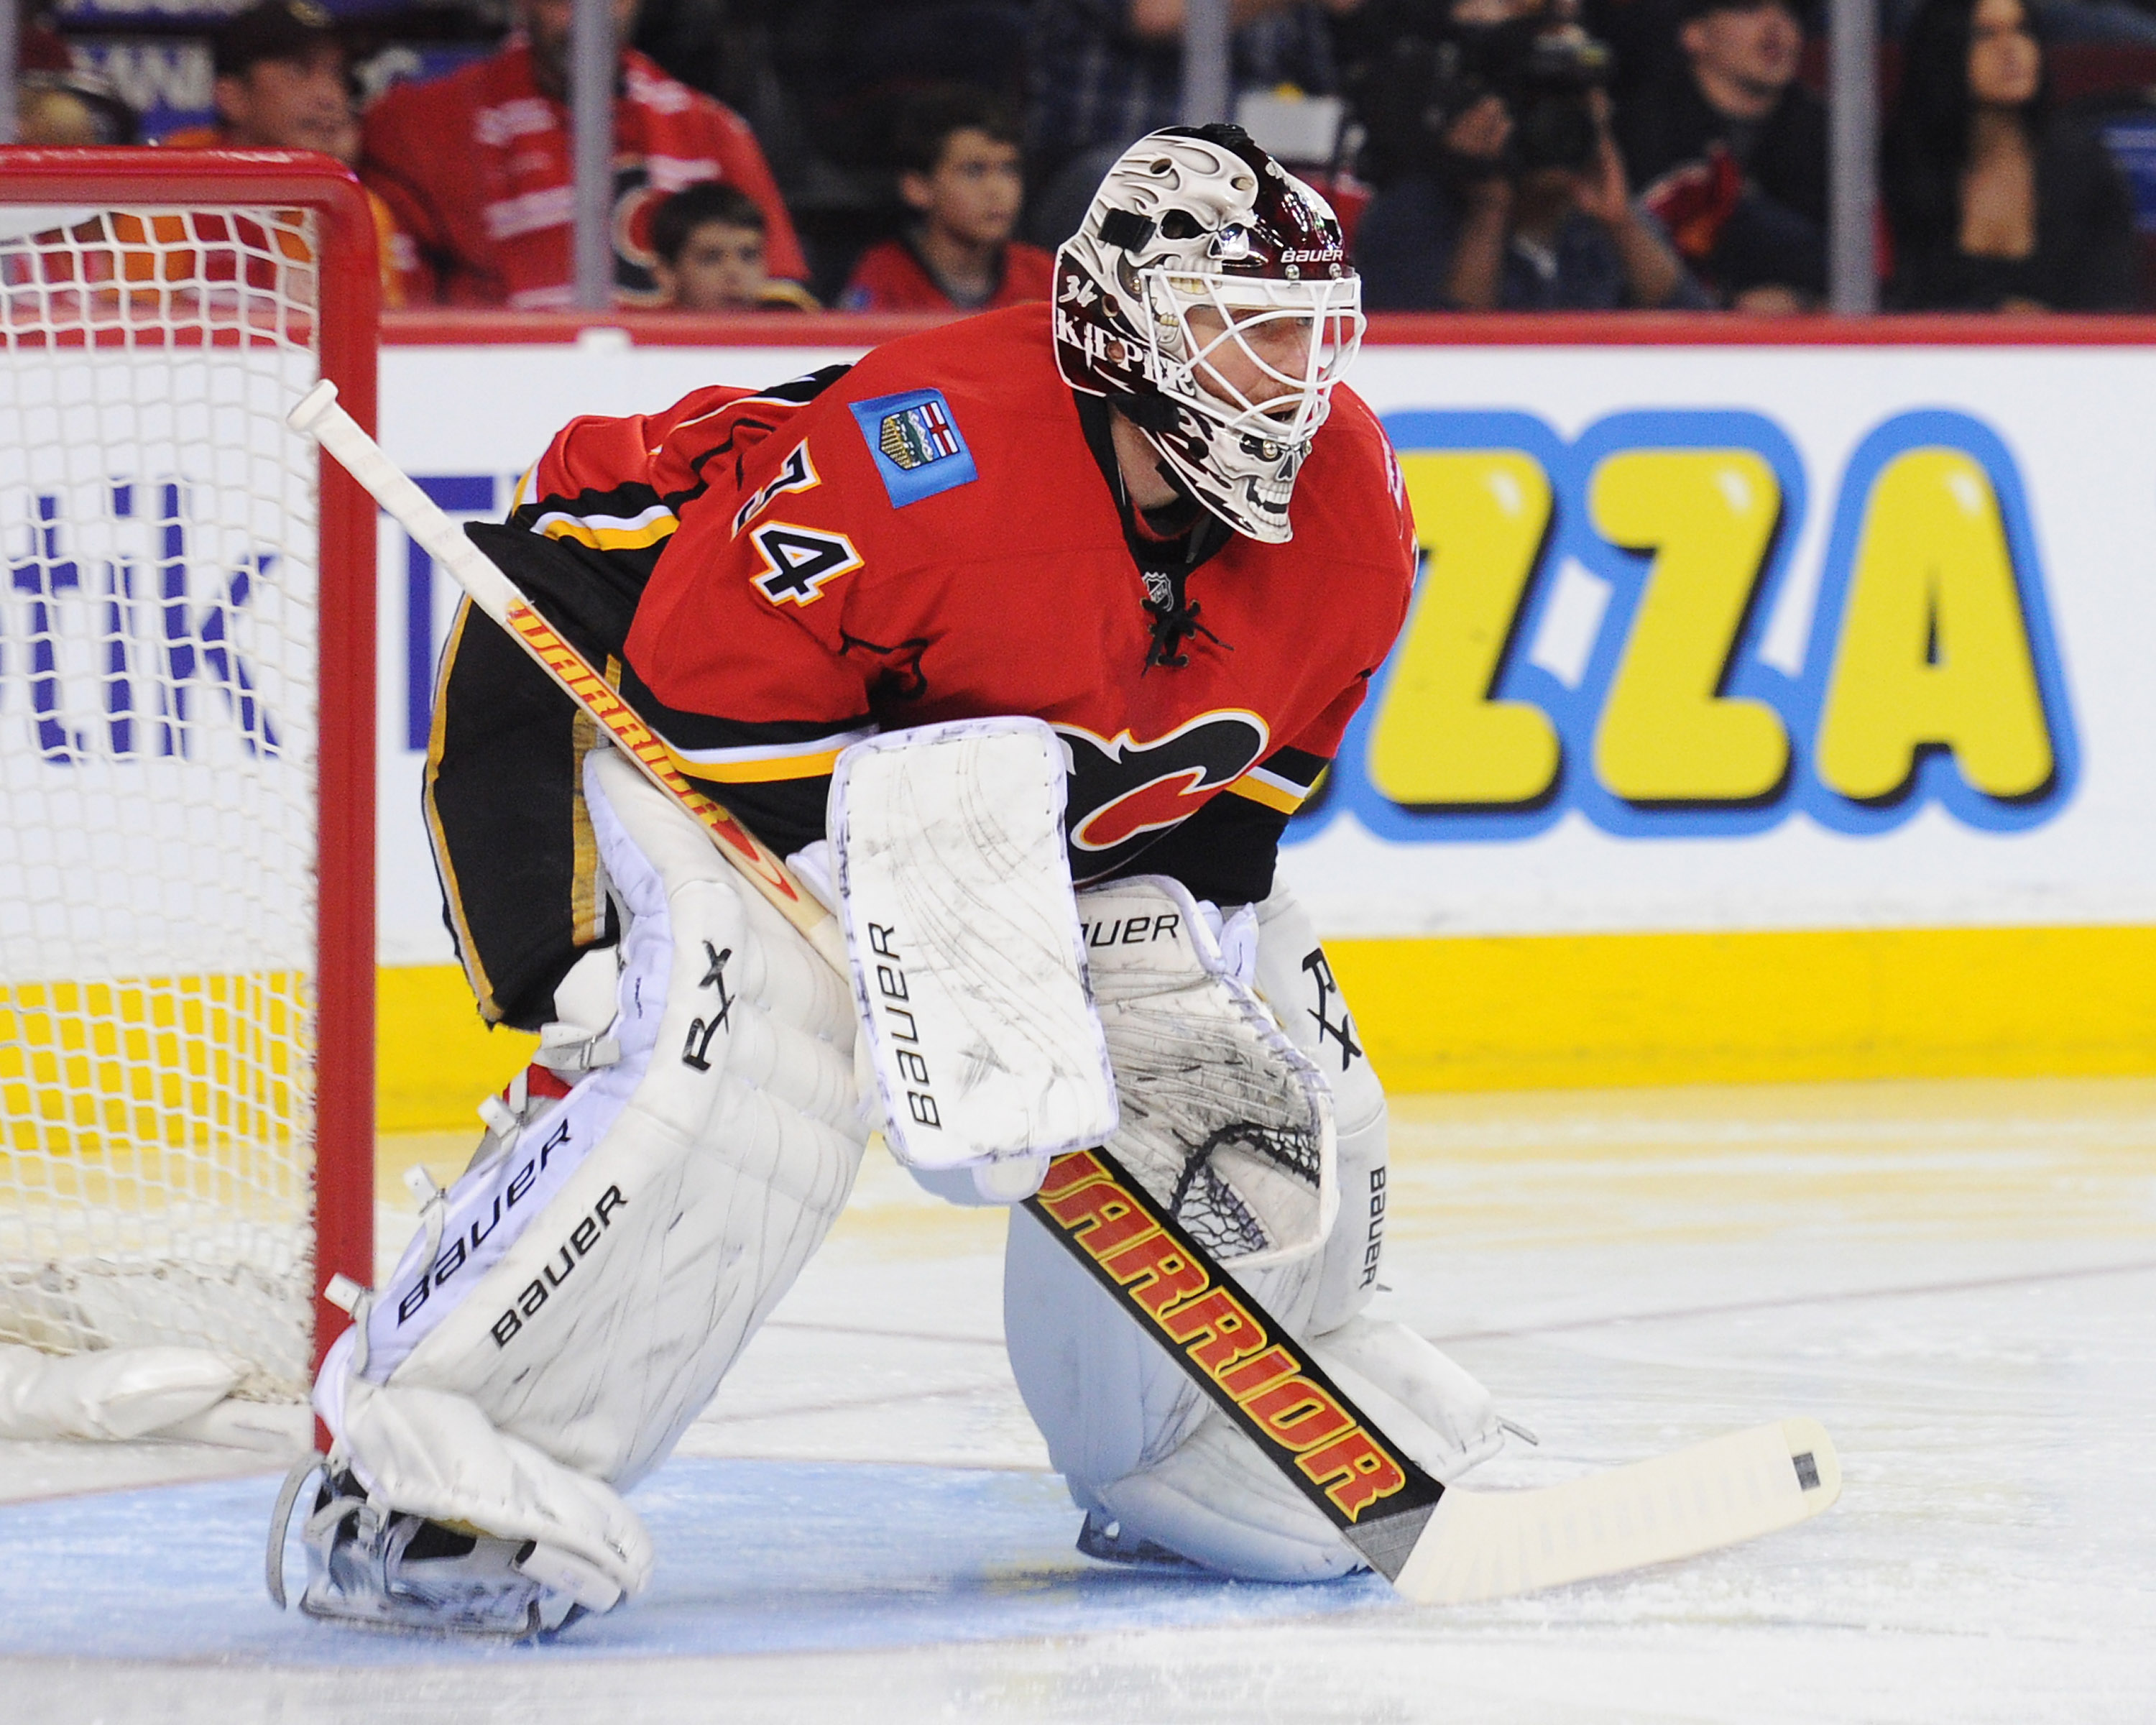 Calgary Flames To Raise Kiprusoff's Number To Rafters